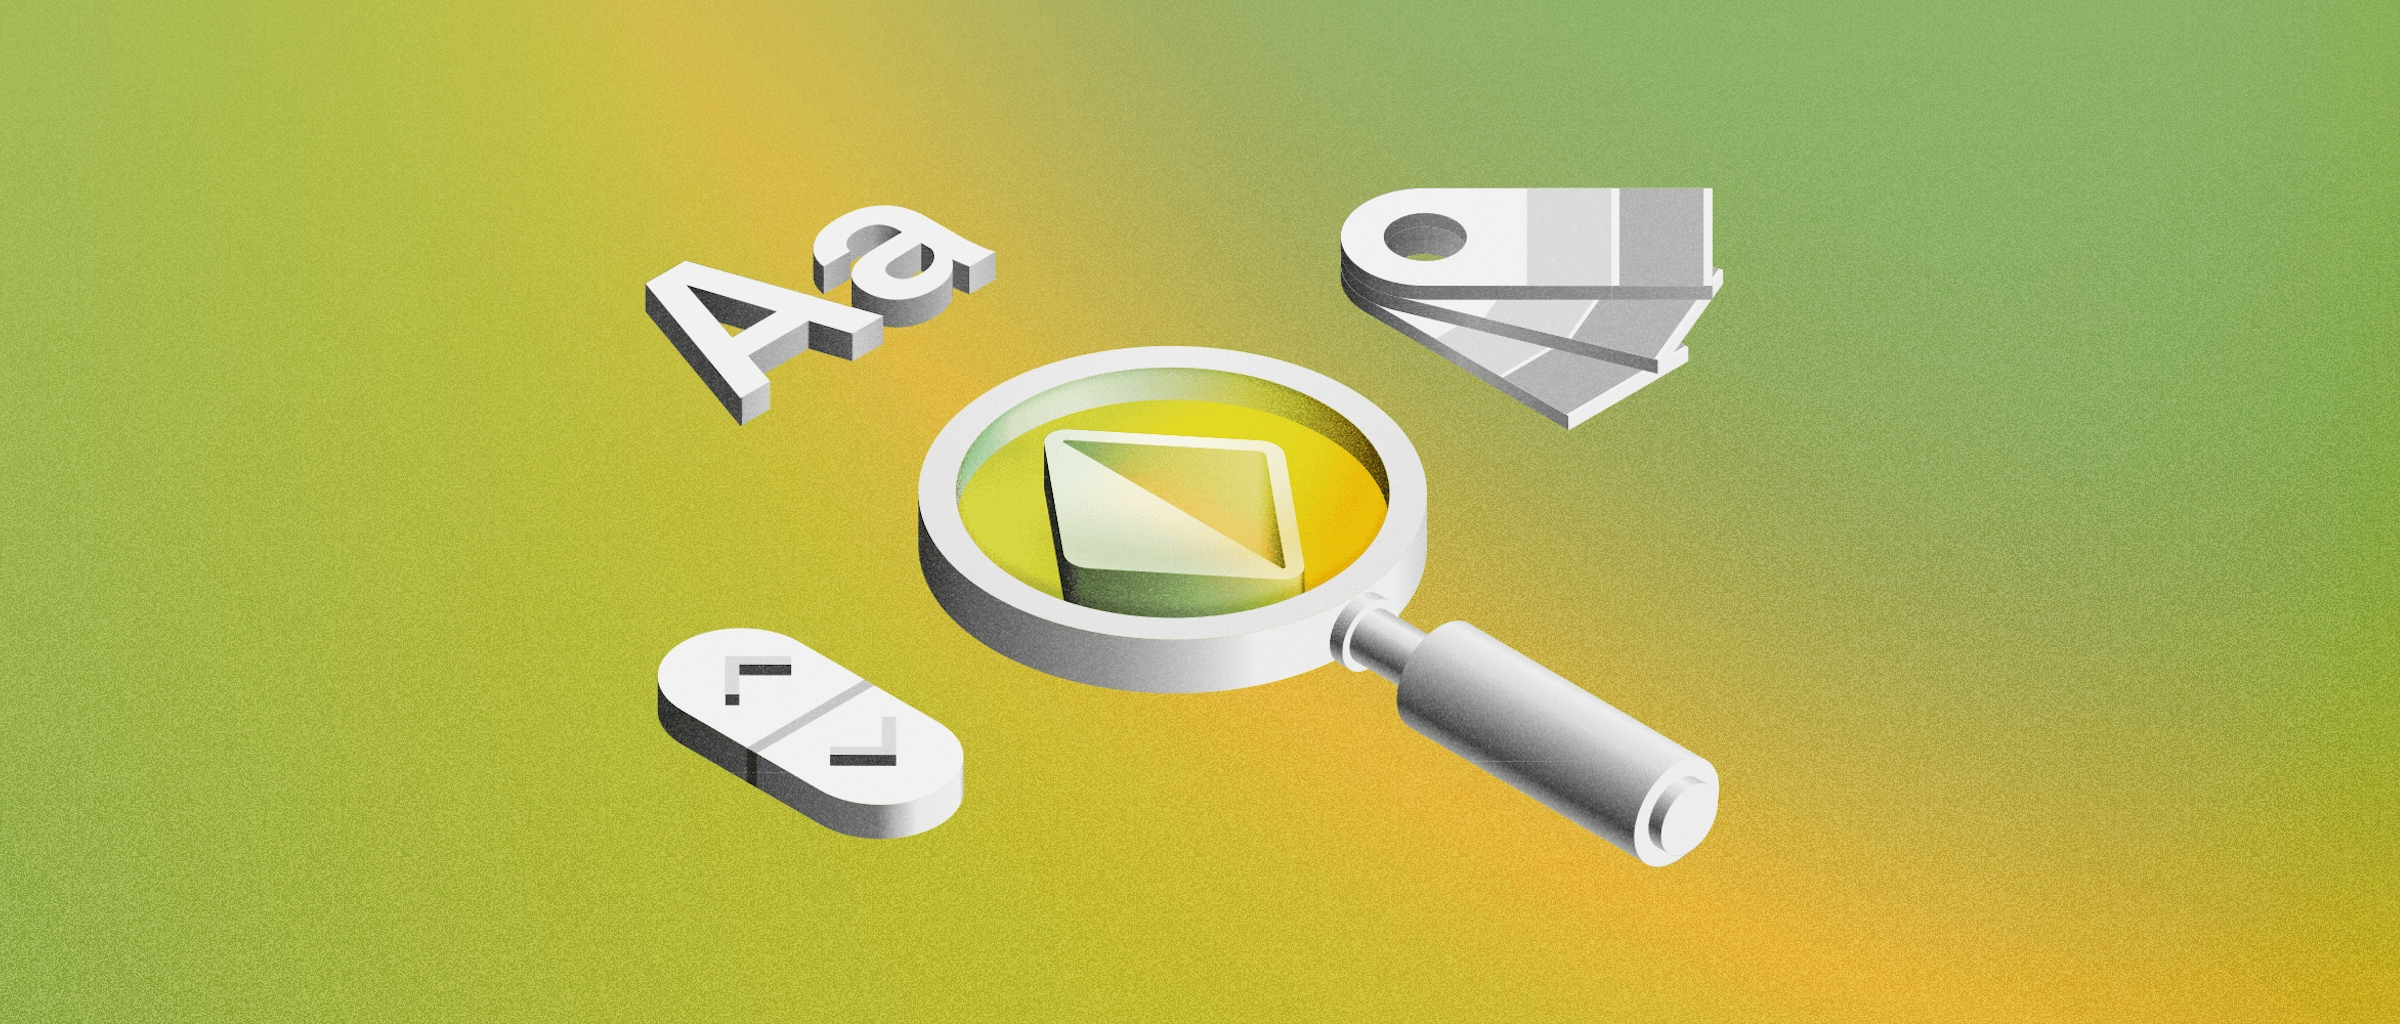 An illustrated image showing stylized icons that represent different handoff tools in Sketch 